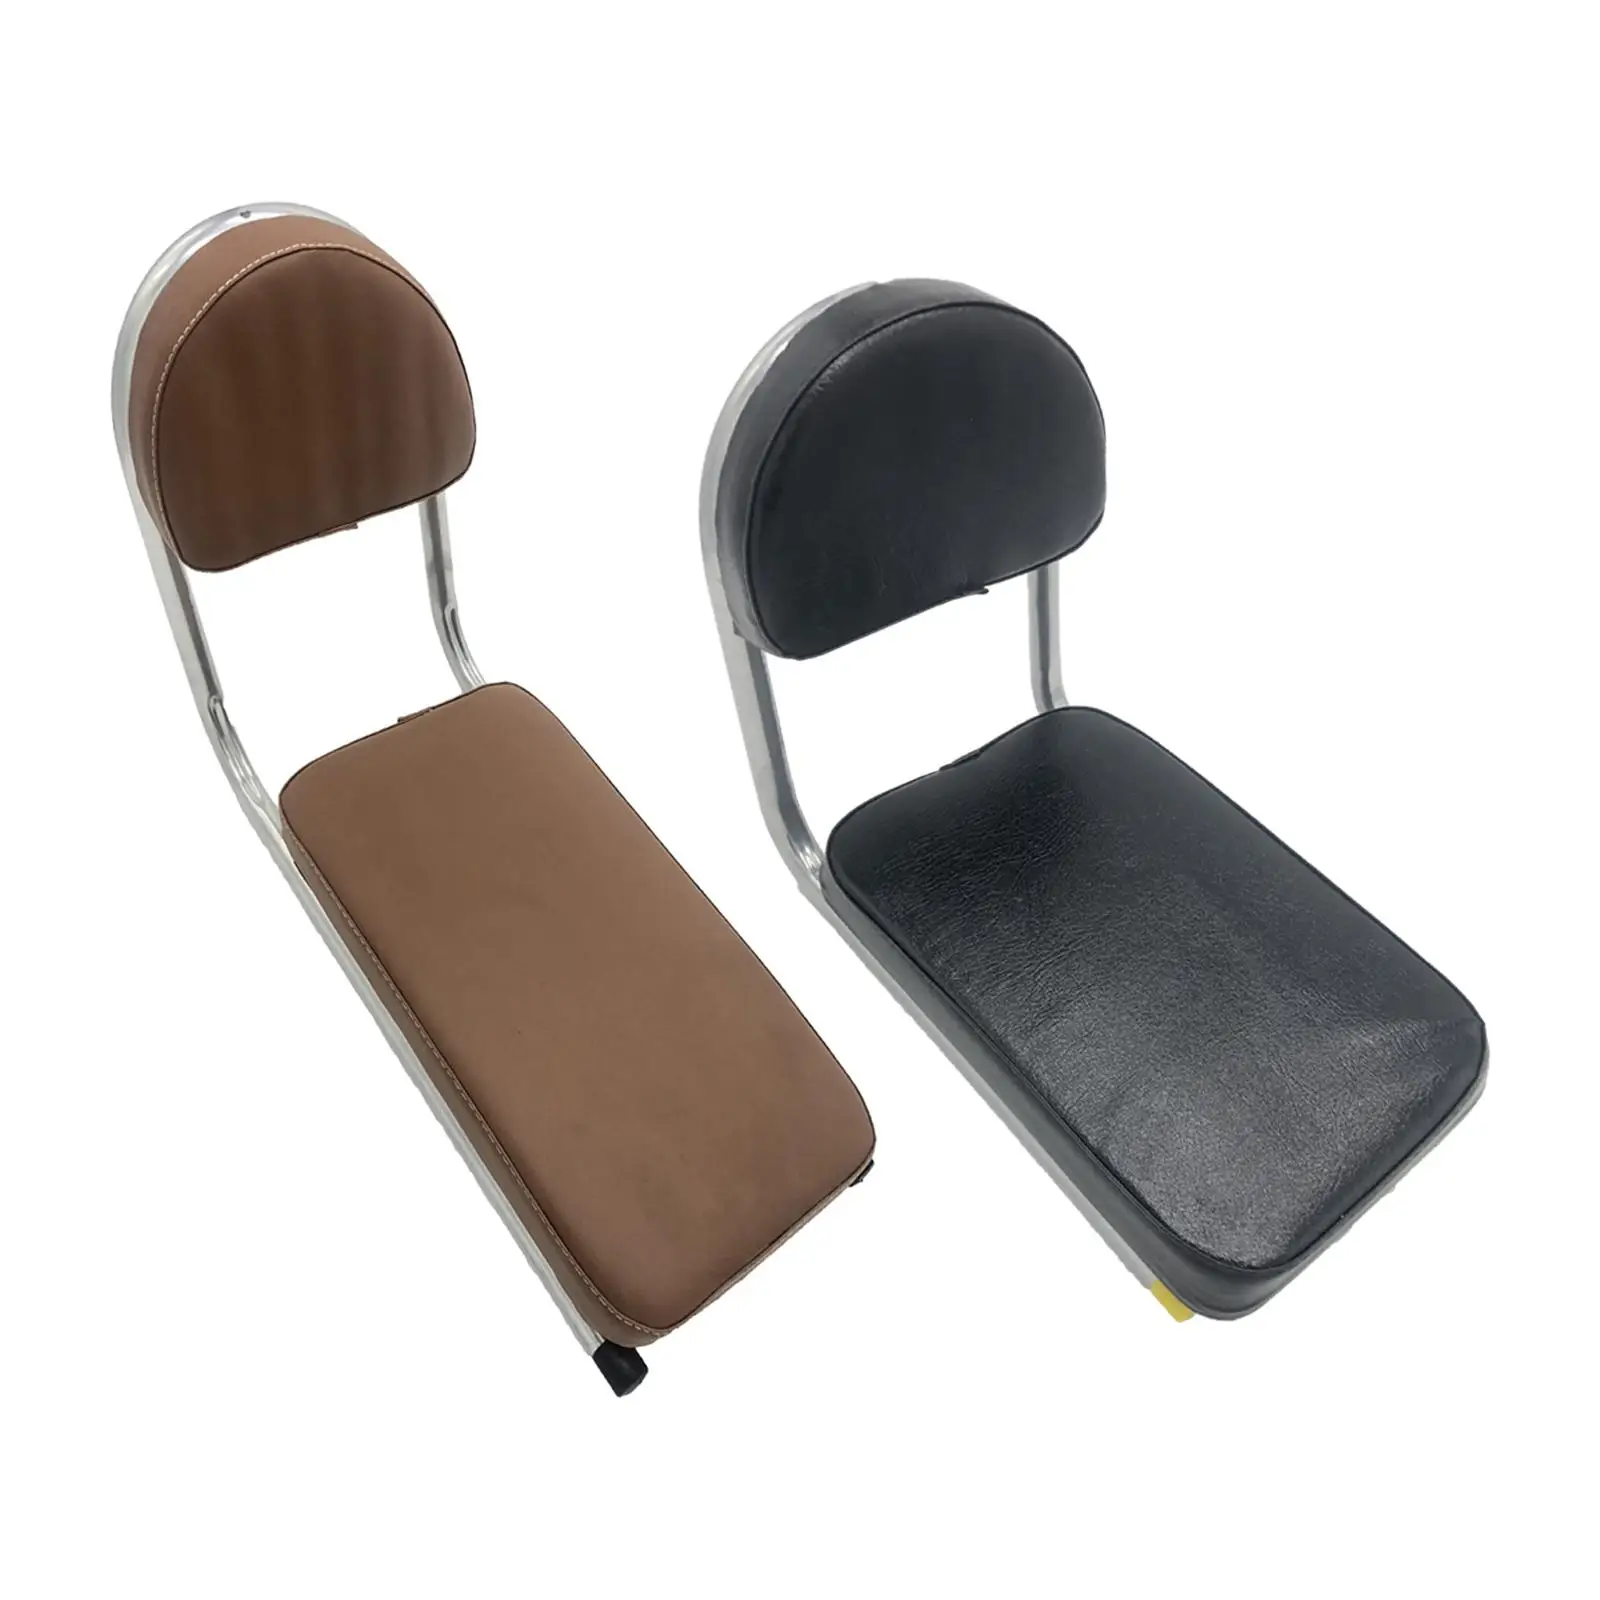 Bicycle Rear Seat Easy Cleaning PU Leather Back Saddle with Backrest Bike Back Seat for Travel Touring Riding Outdoor Accessory